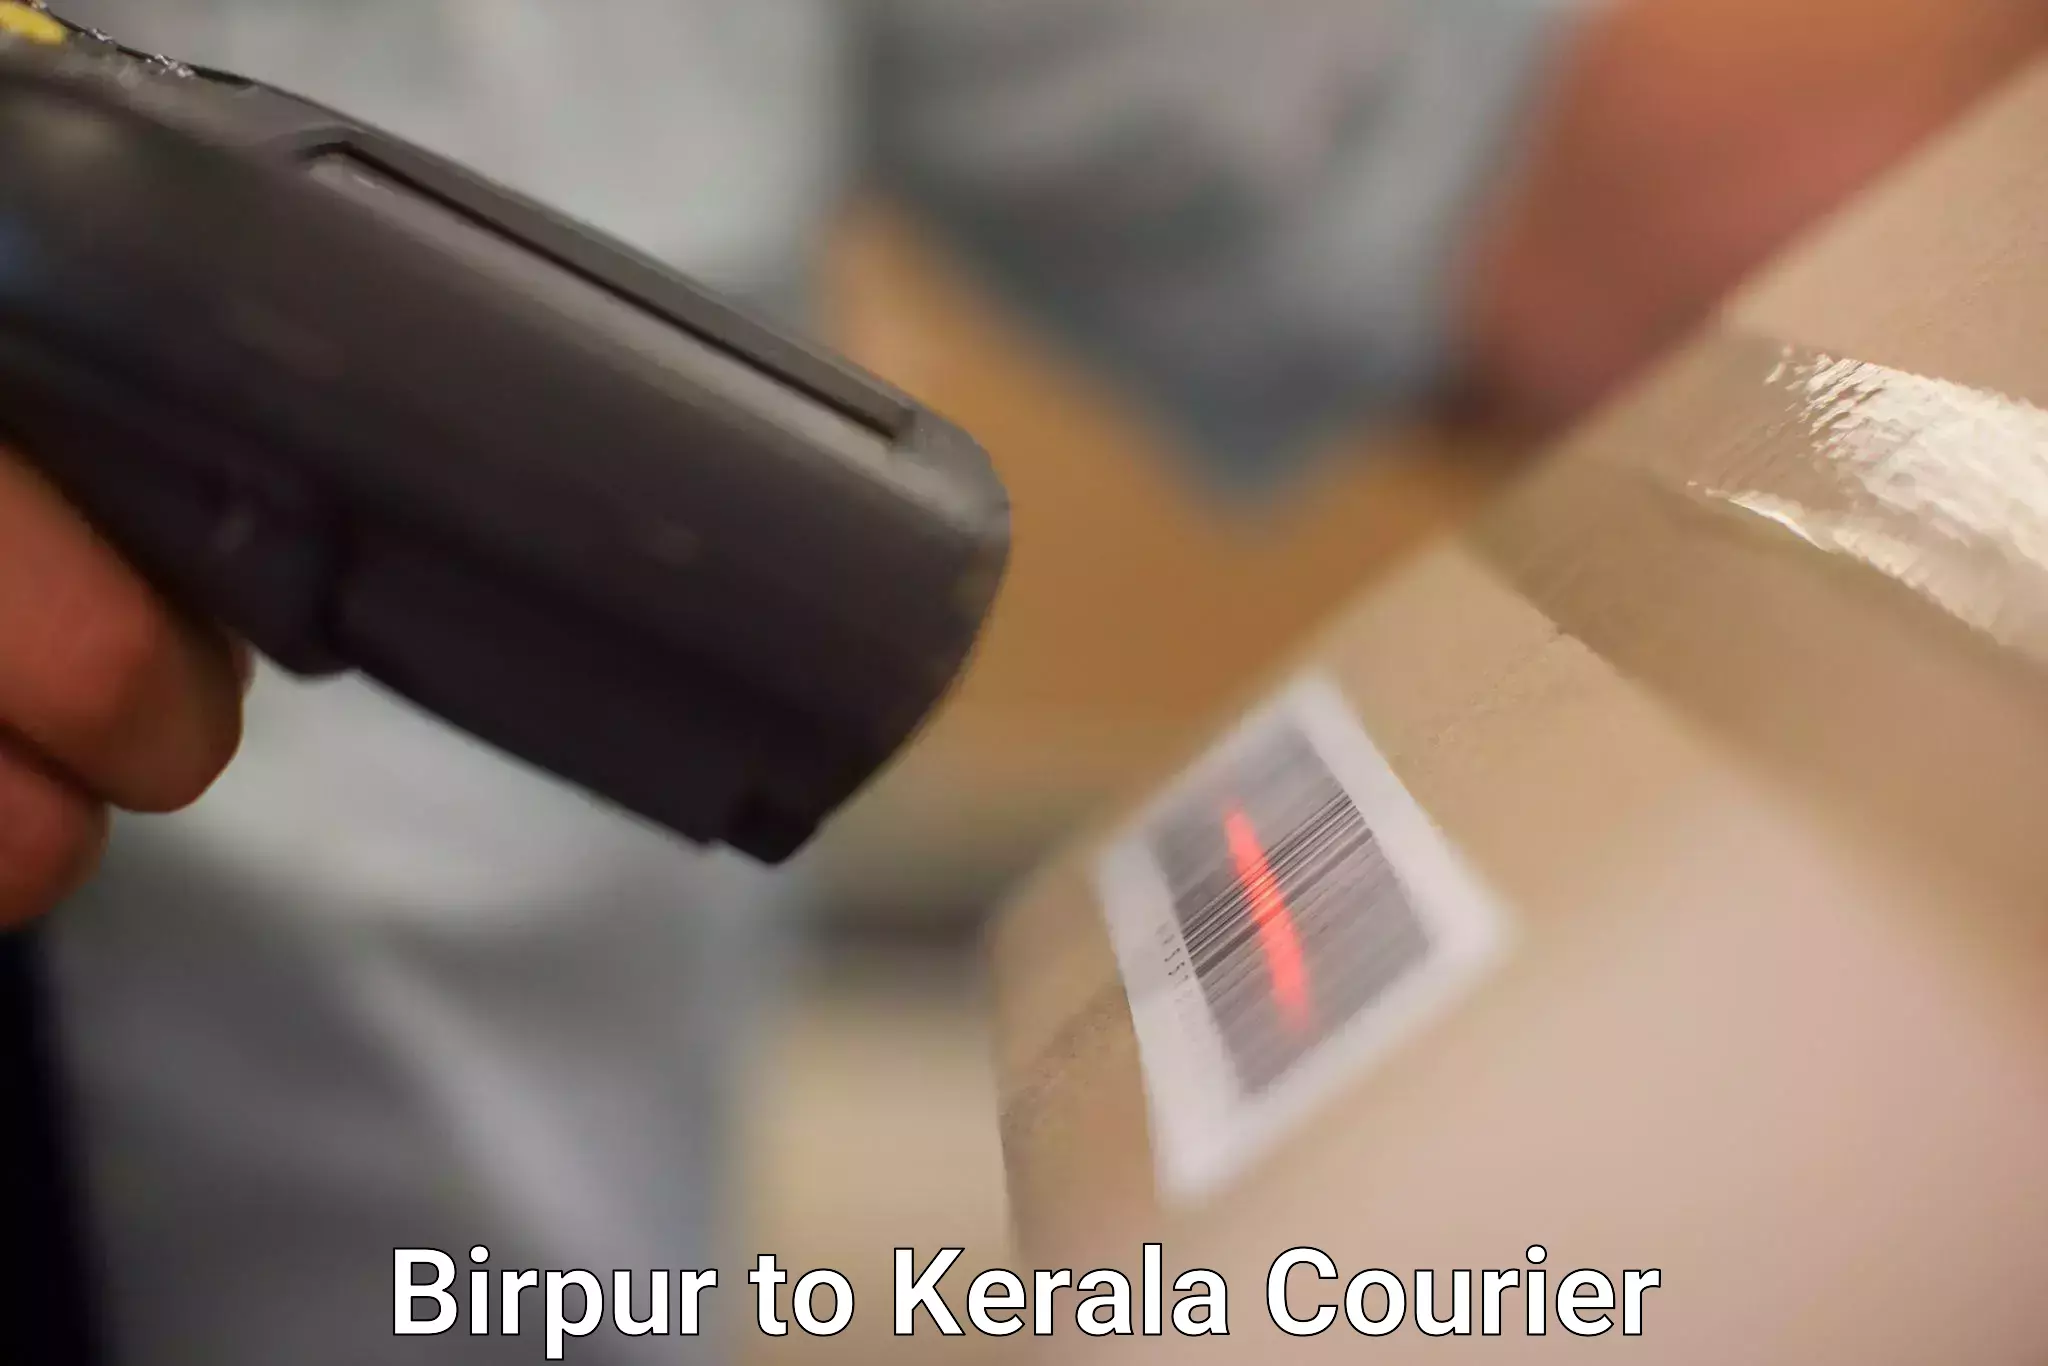 Supply chain delivery Birpur to Kochi